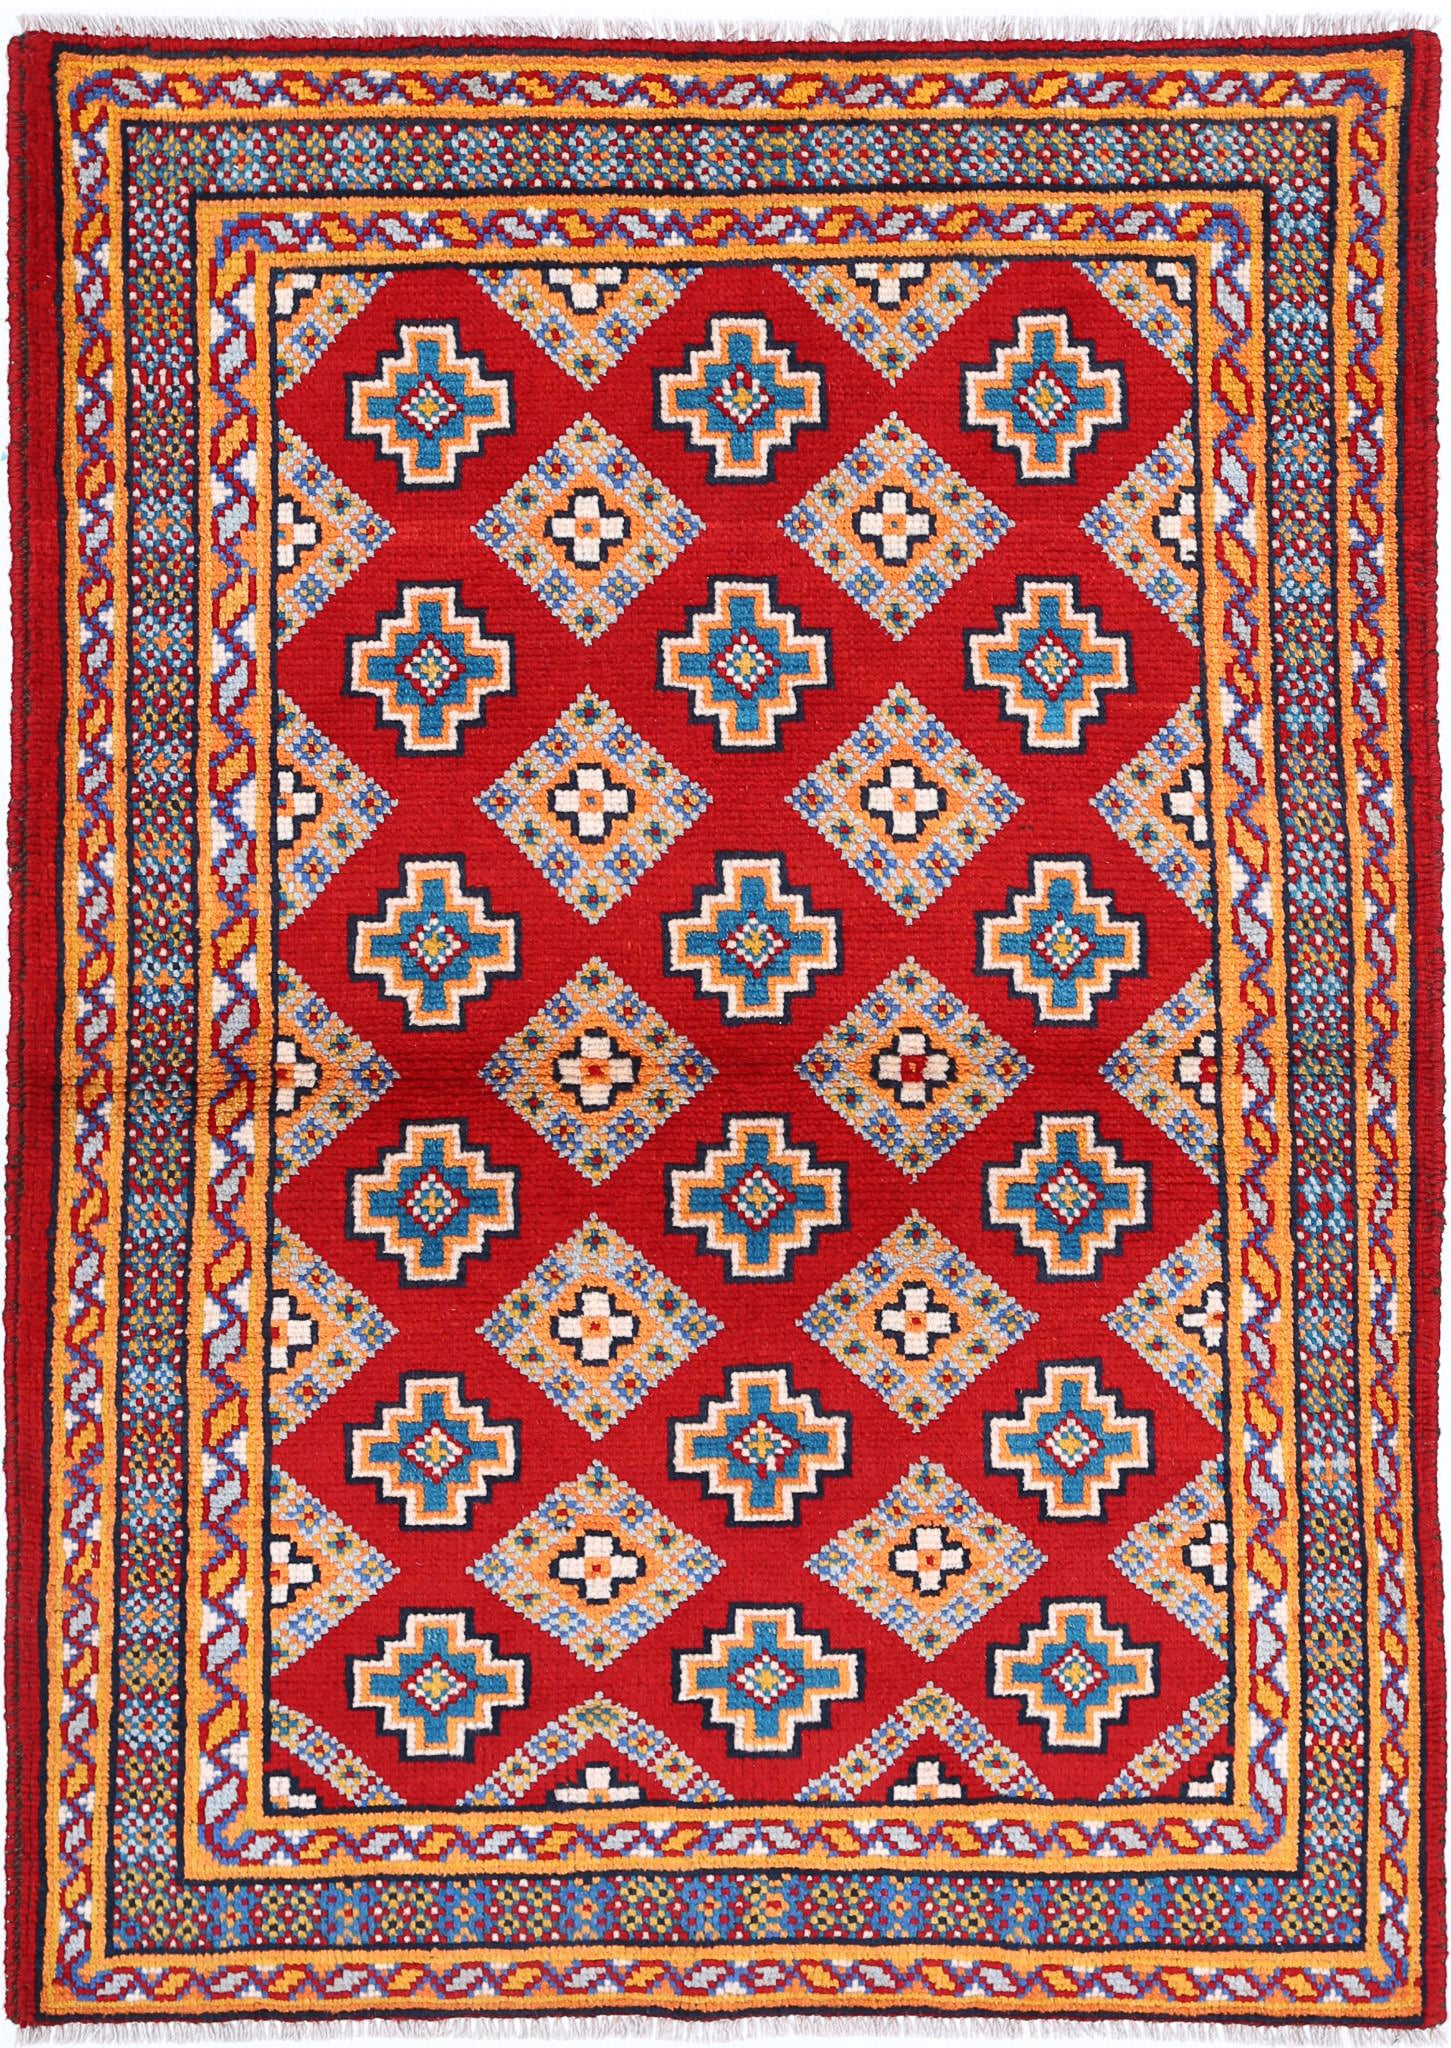 Revival-hand-knotted-qarghani-wool-rug-5014050.jpg